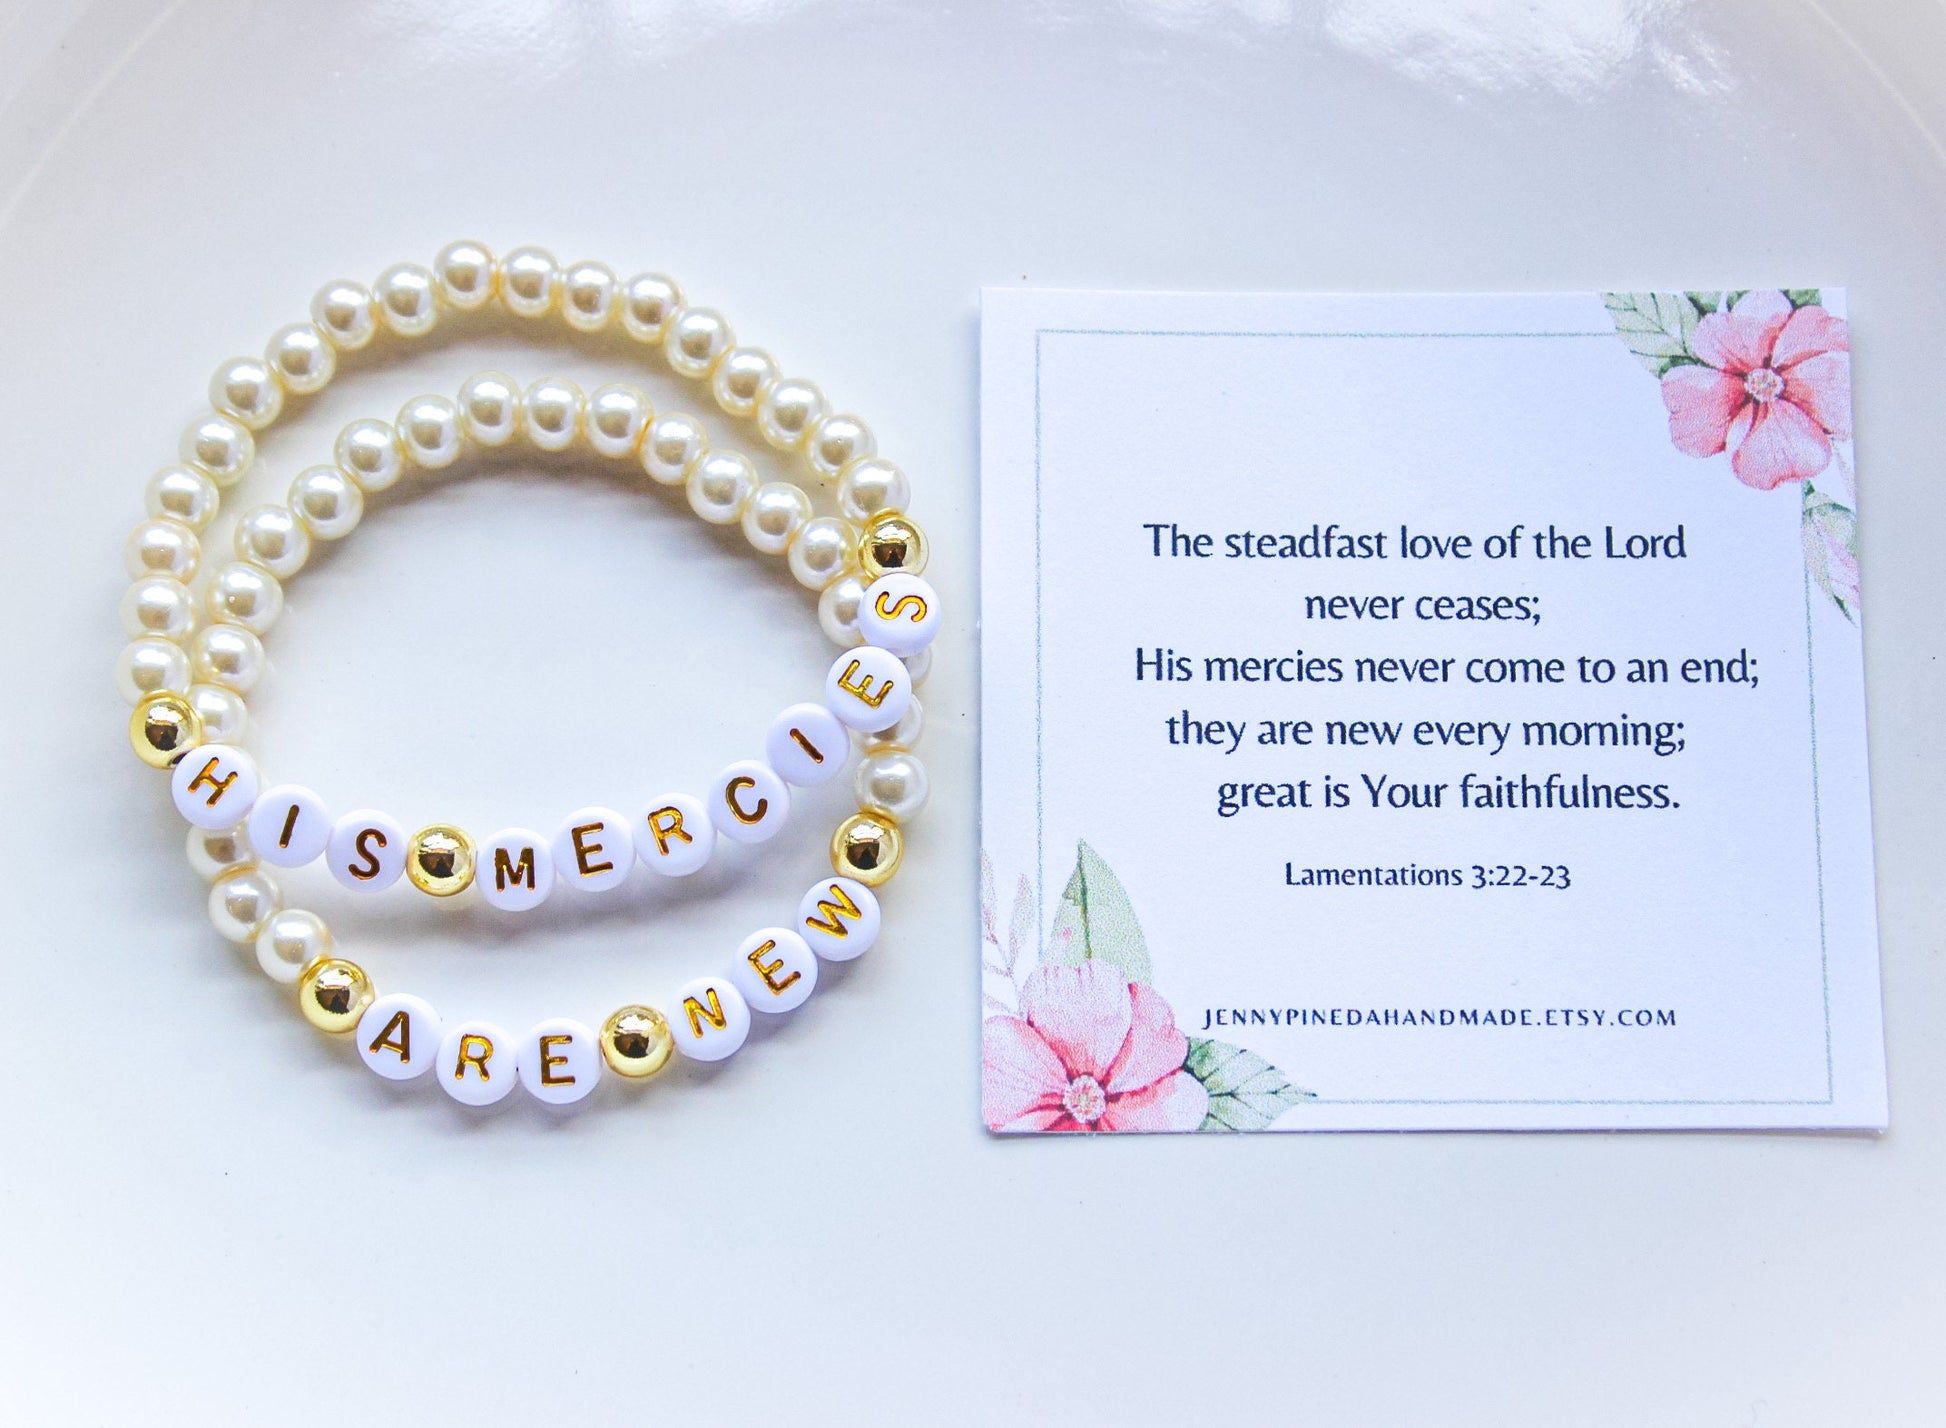 His mercies are new bracelet, reformed gift, faith bracelet, christian jewelry, his mercies are new every morning, christian birthday gift